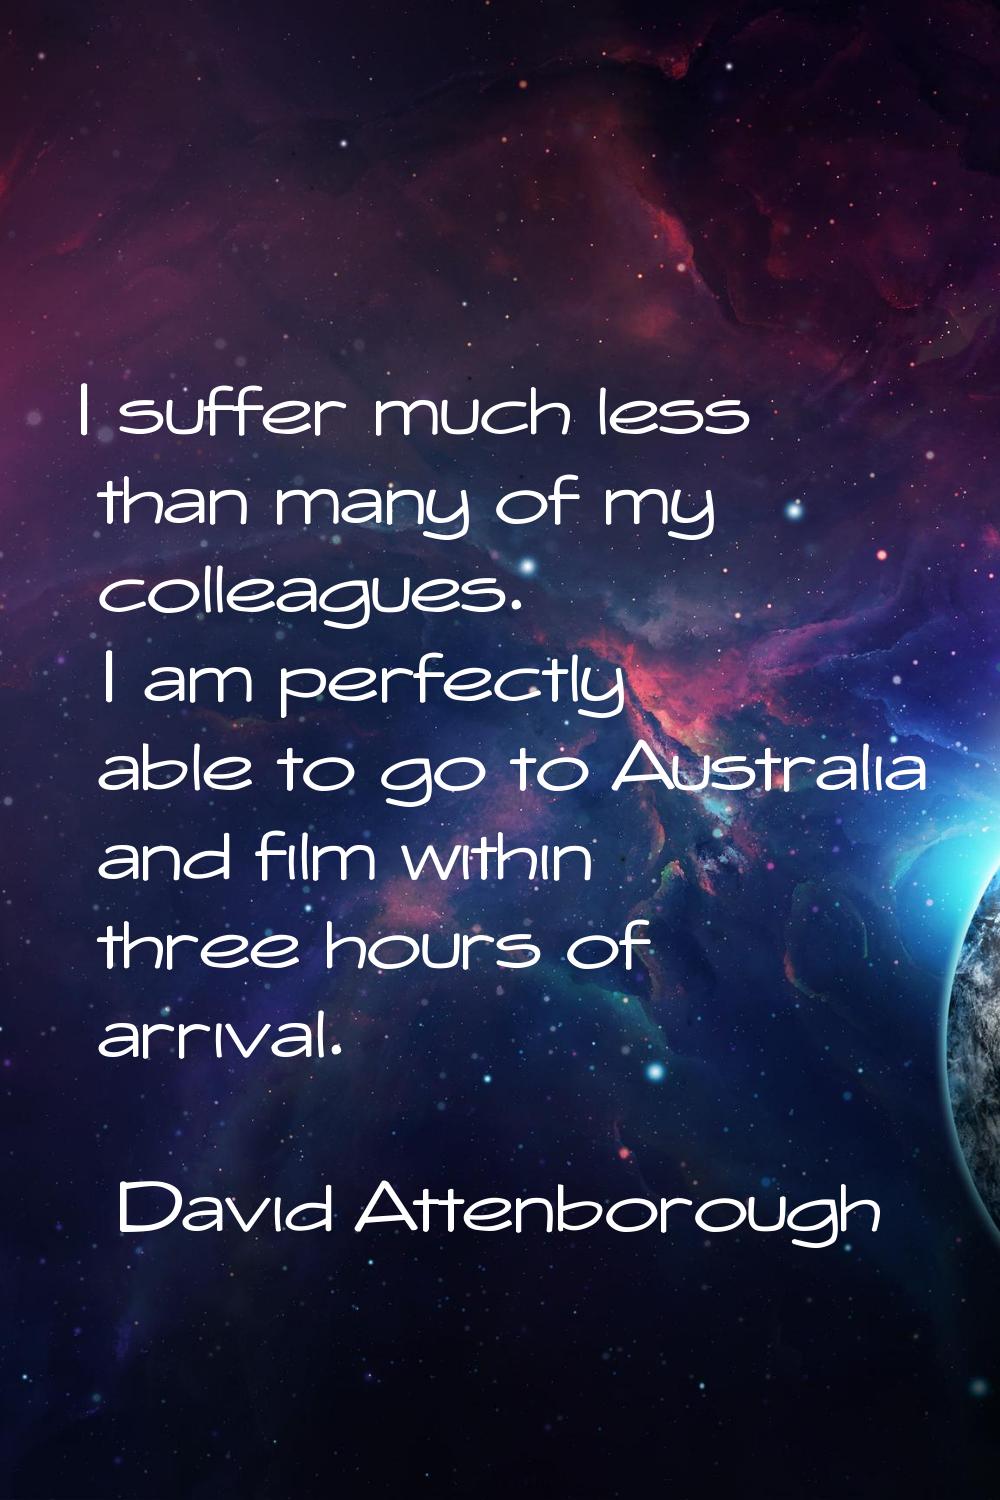 I suffer much less than many of my colleagues. I am perfectly able to go to Australia and film with